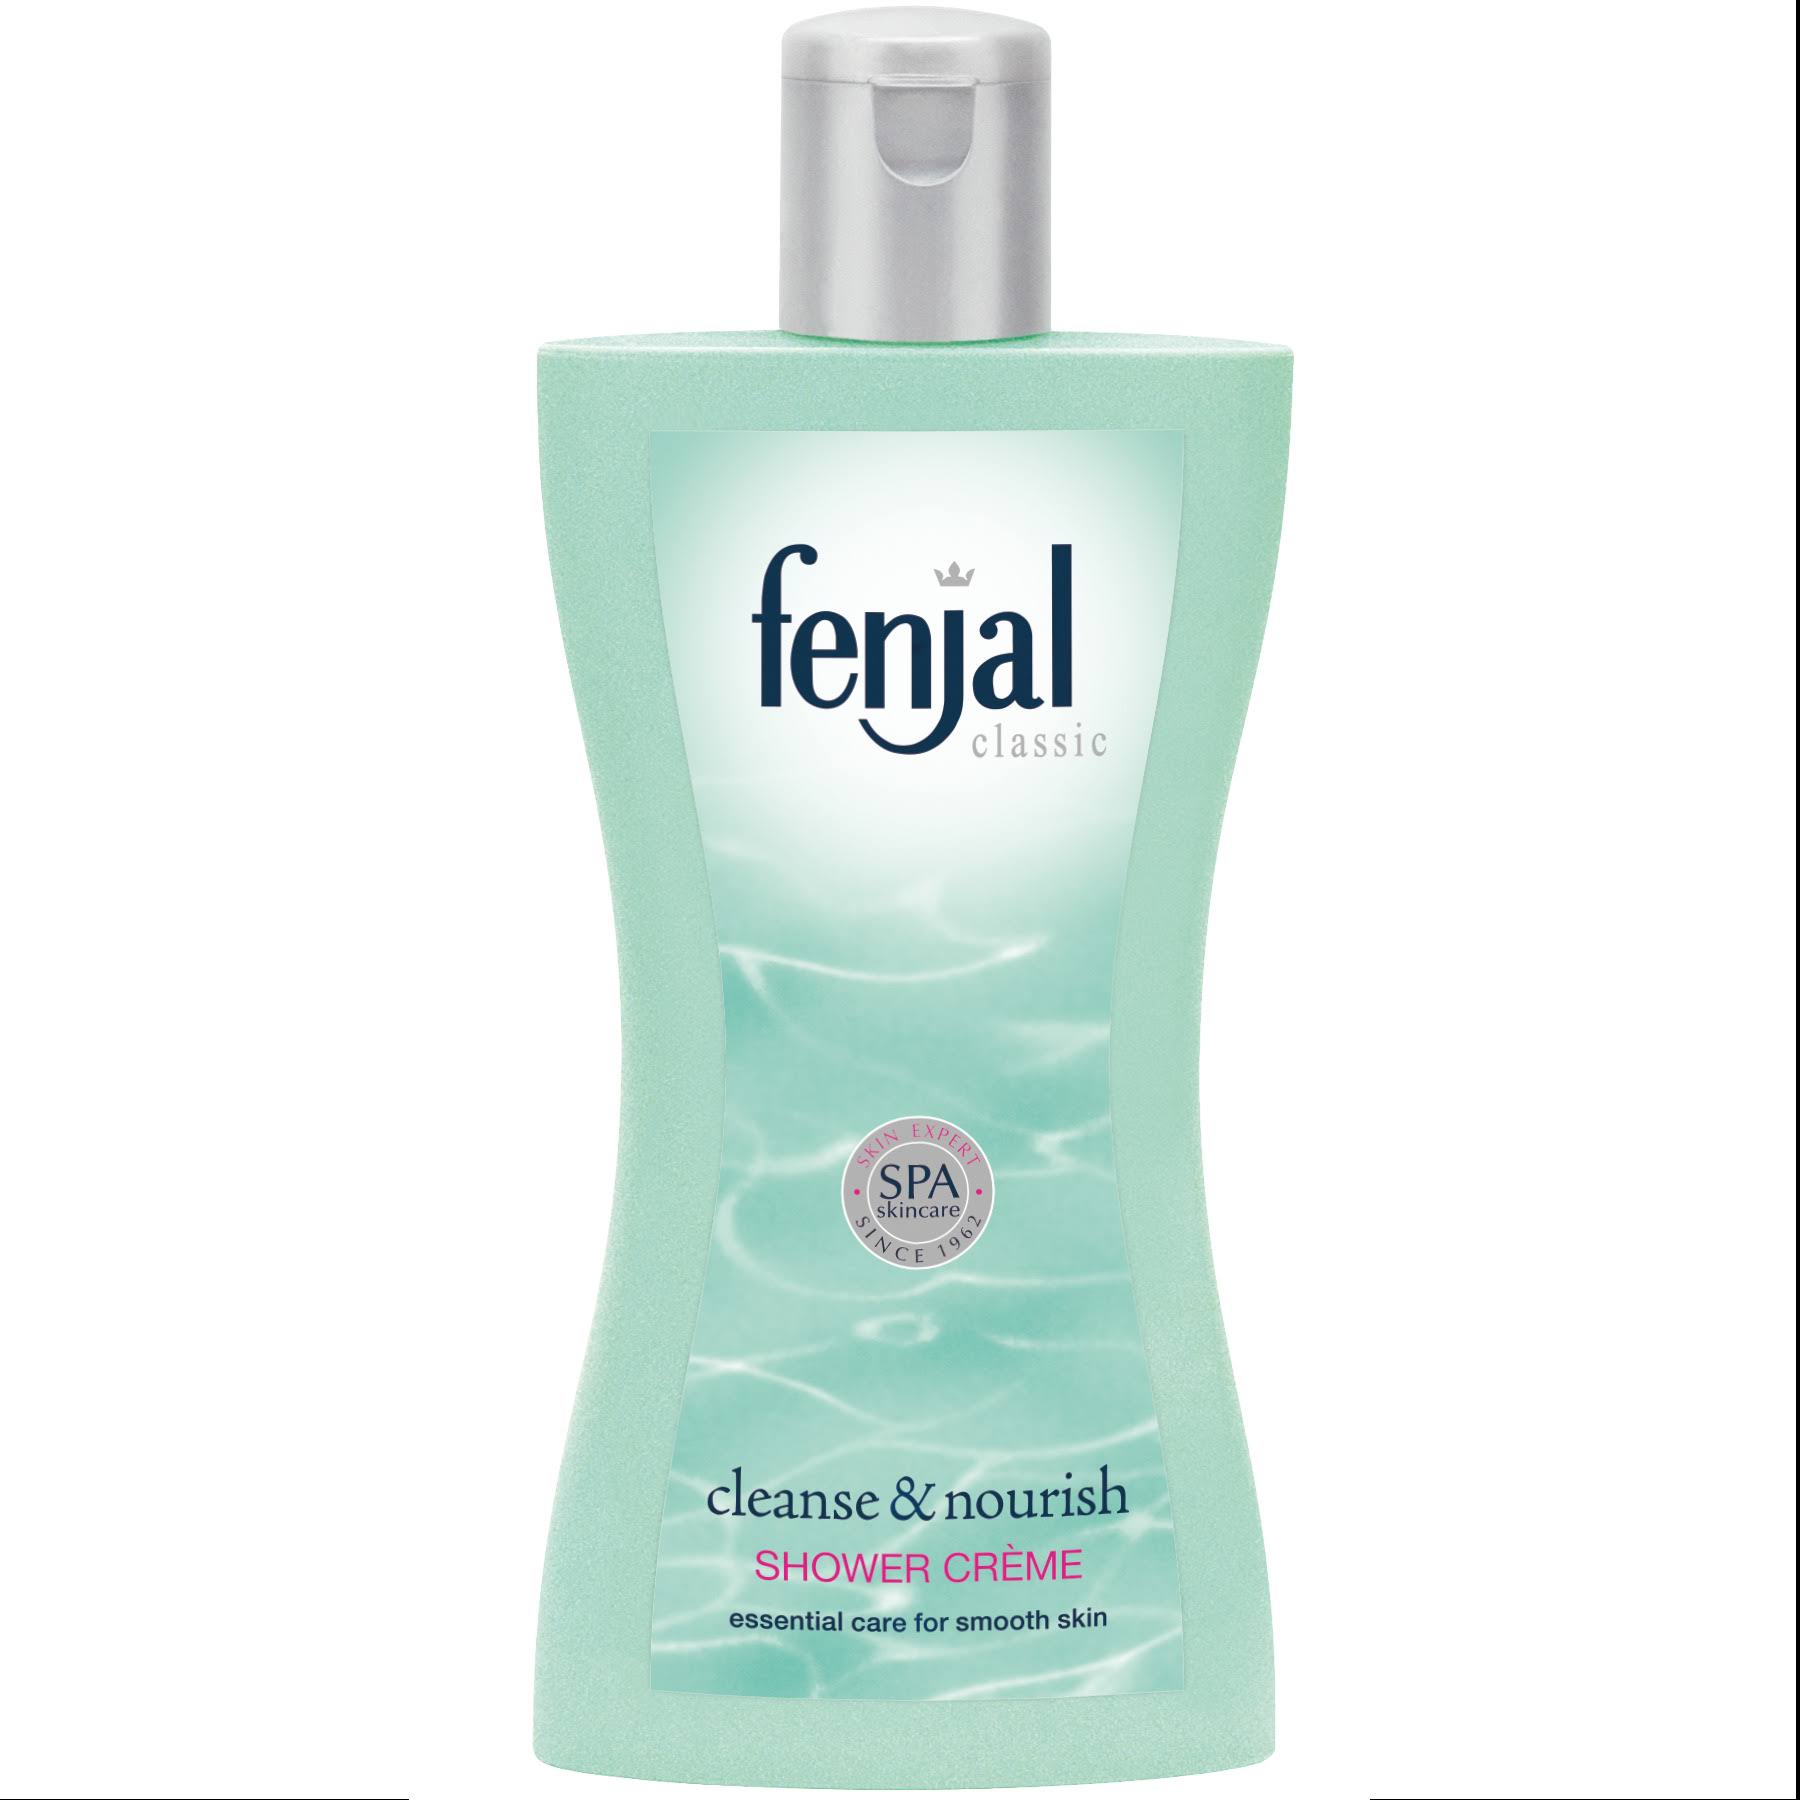 Fenjal Classic Shower Creme, 200ml